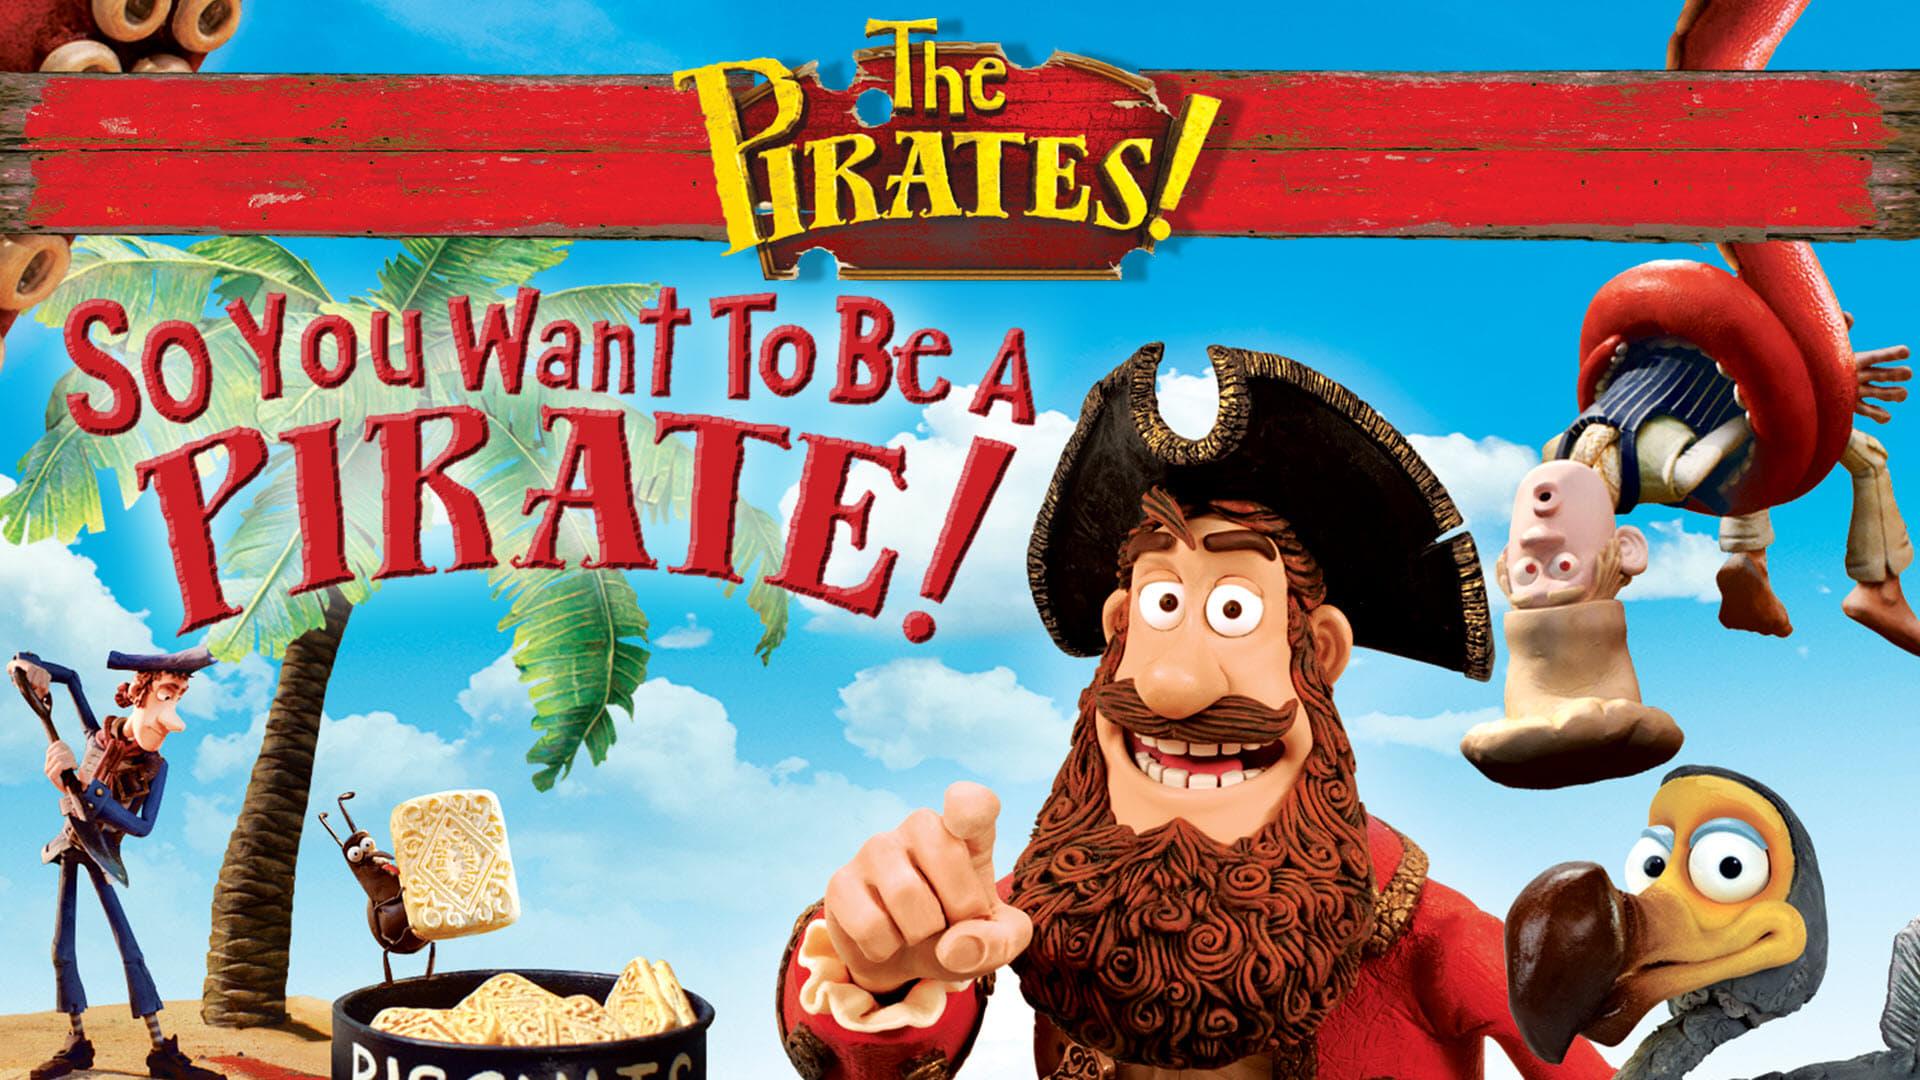 So You Want To Be A Pirate! backdrop